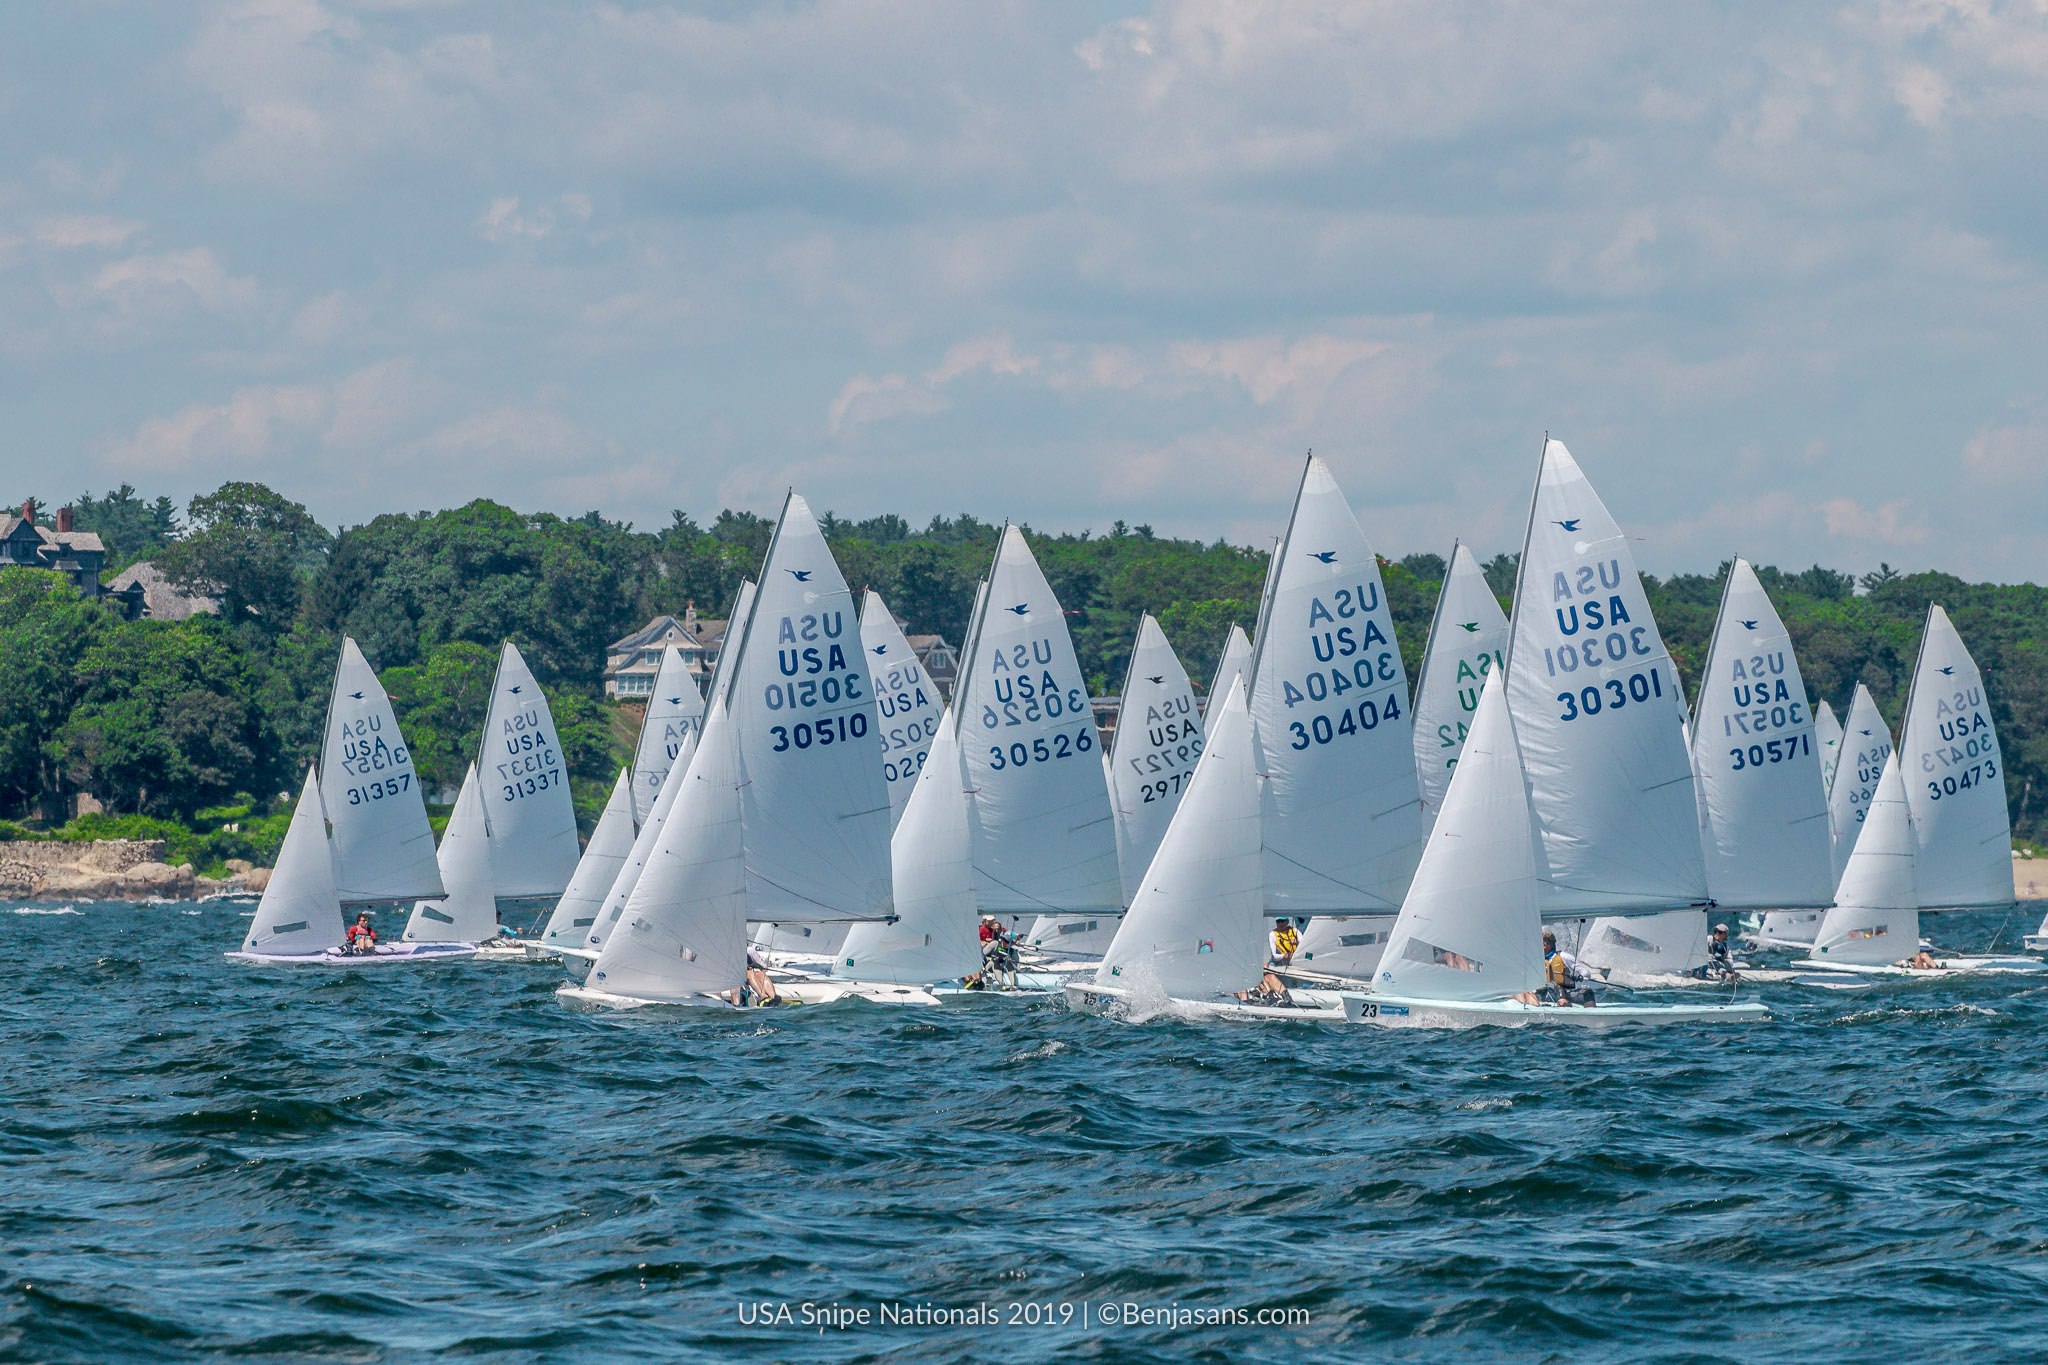  Snipe  National US Snipe Championship, Beverly MA  Final results, Tomas Hornos/Kathleen Tocke winners in the 51 boat fleet